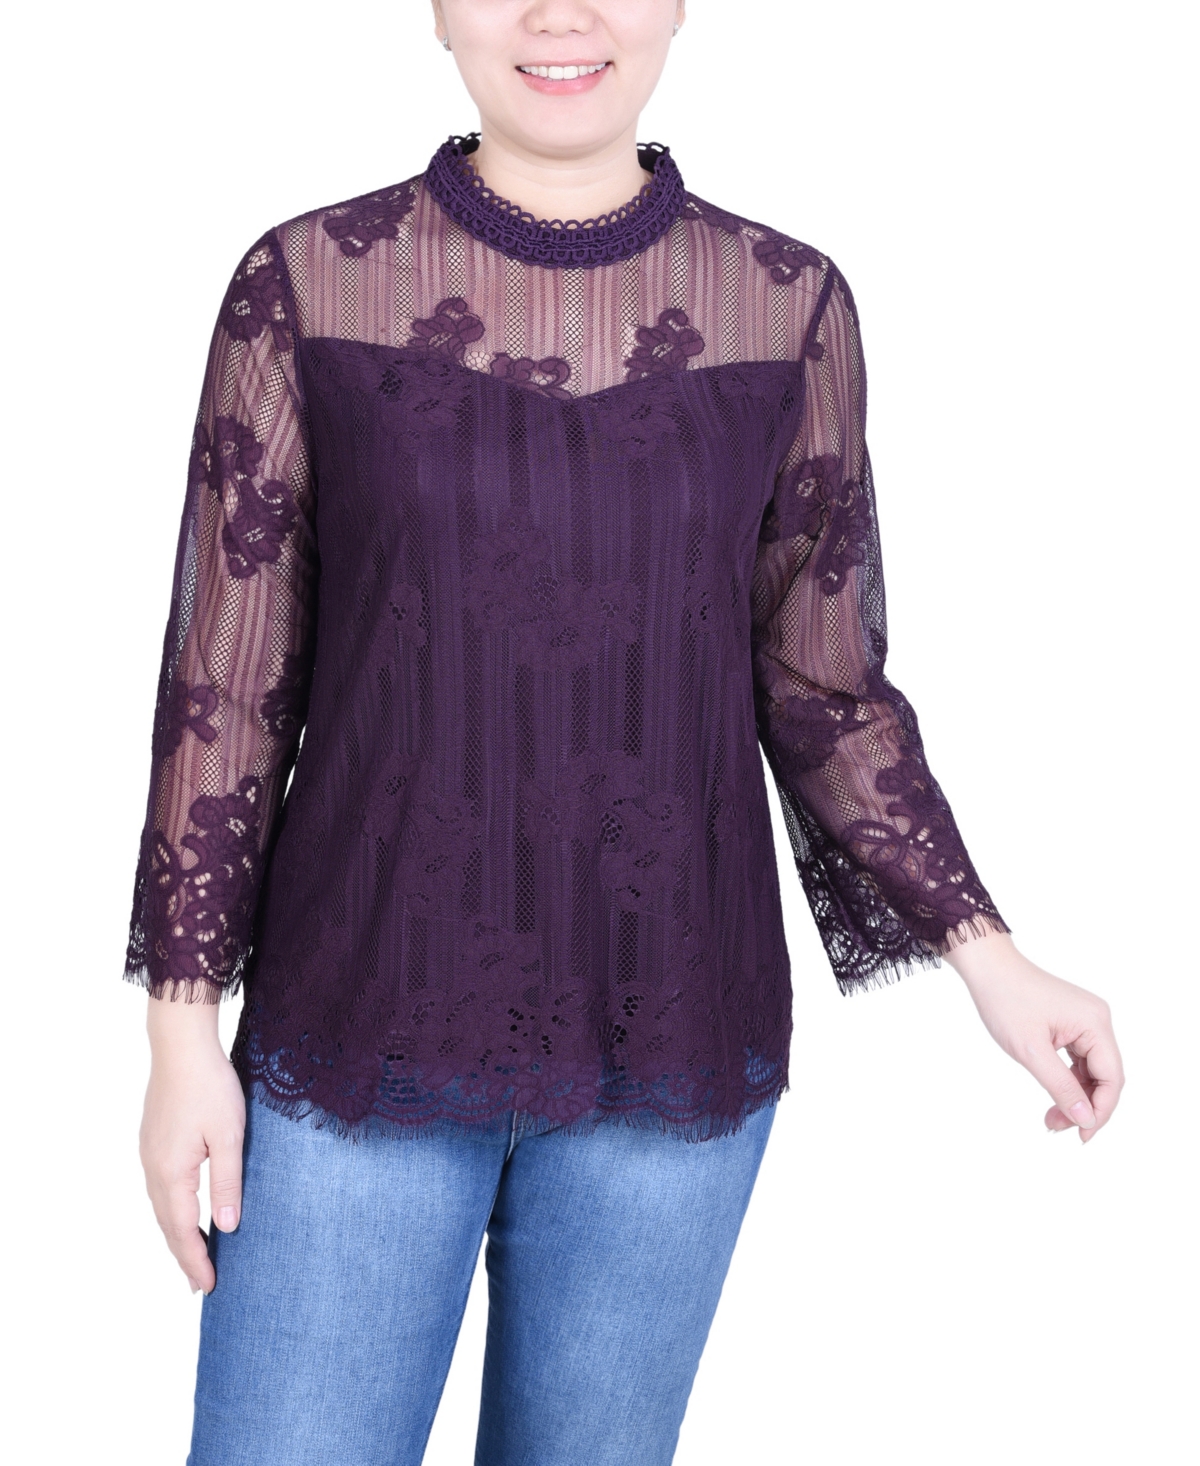 Women's 3/4 Sleeve Lace Blouse - Persian Red